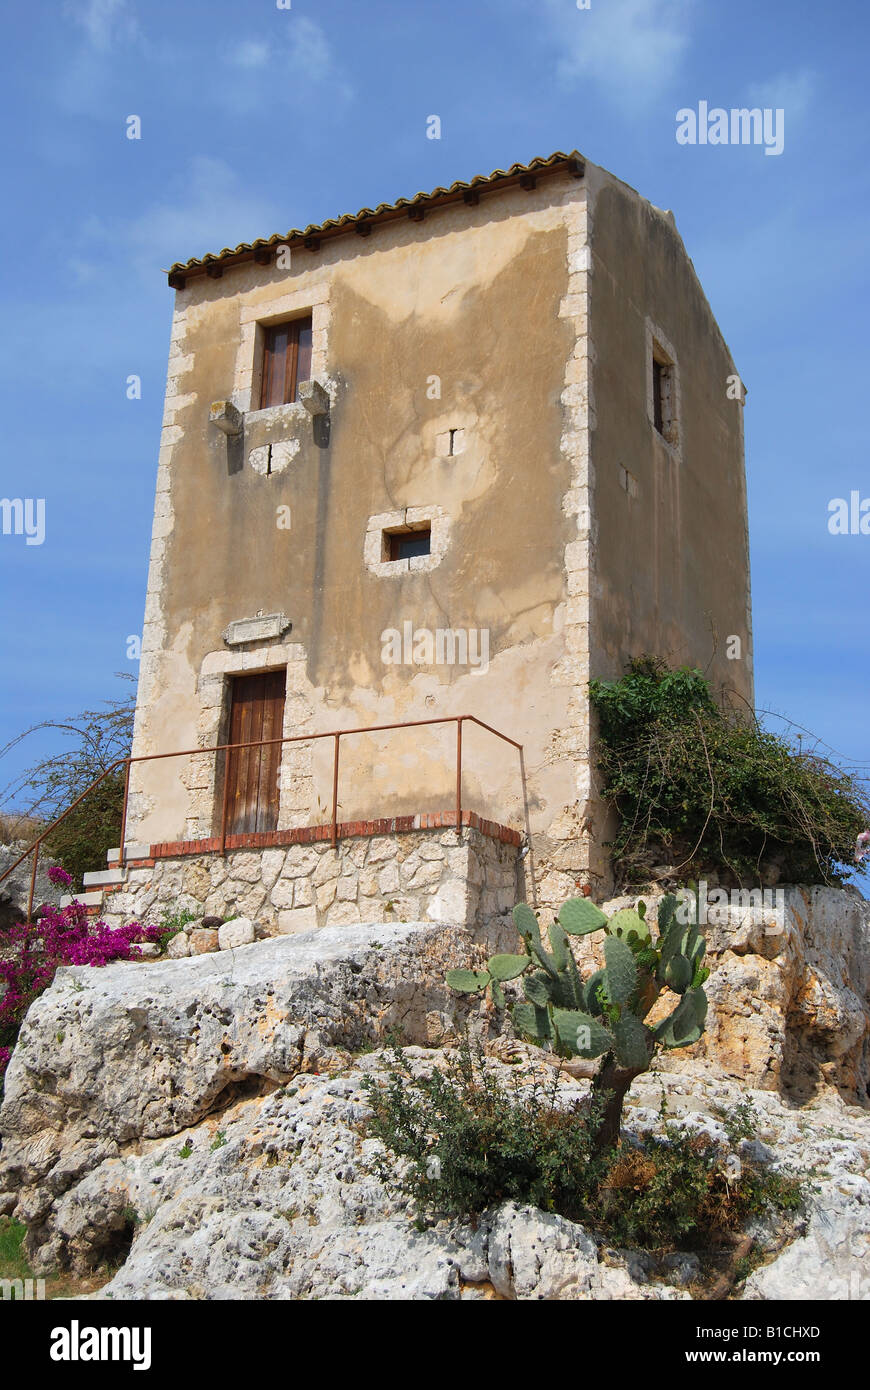 Watchtower, Teatro Greco, The Parco Archeologico, Siracusa, Sicily, Italy Stock Photo